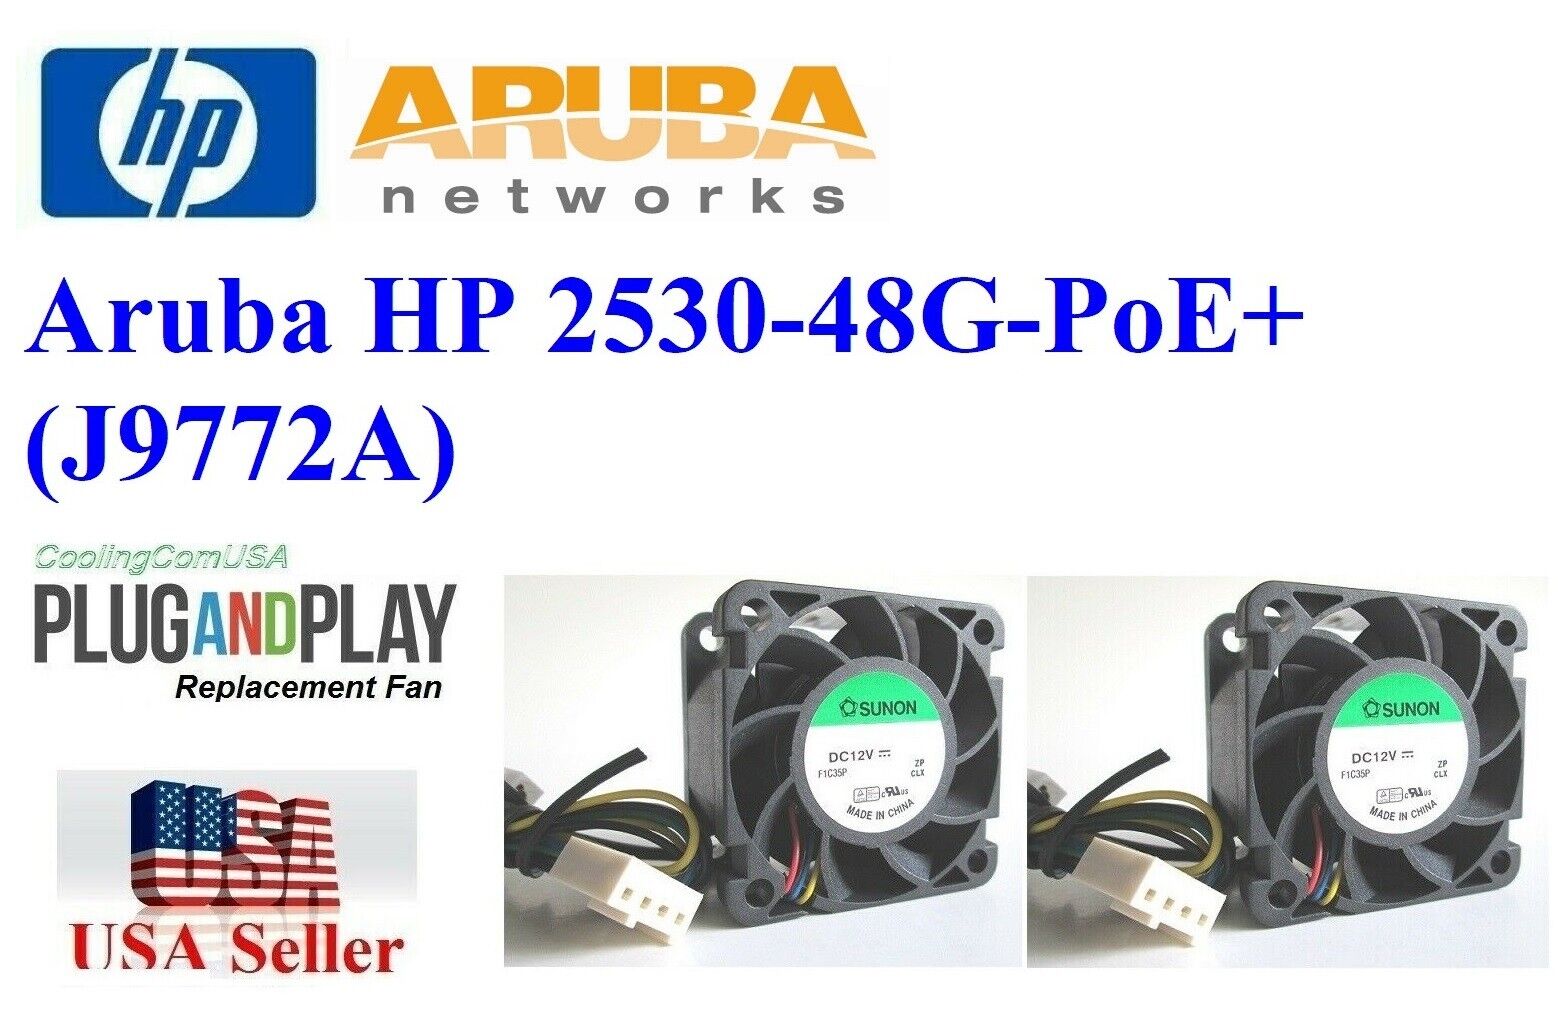 Pack of 2x QUIET Replacement Fans for Aruba HP 2530-48G-PoE+ (J9772A) Switches